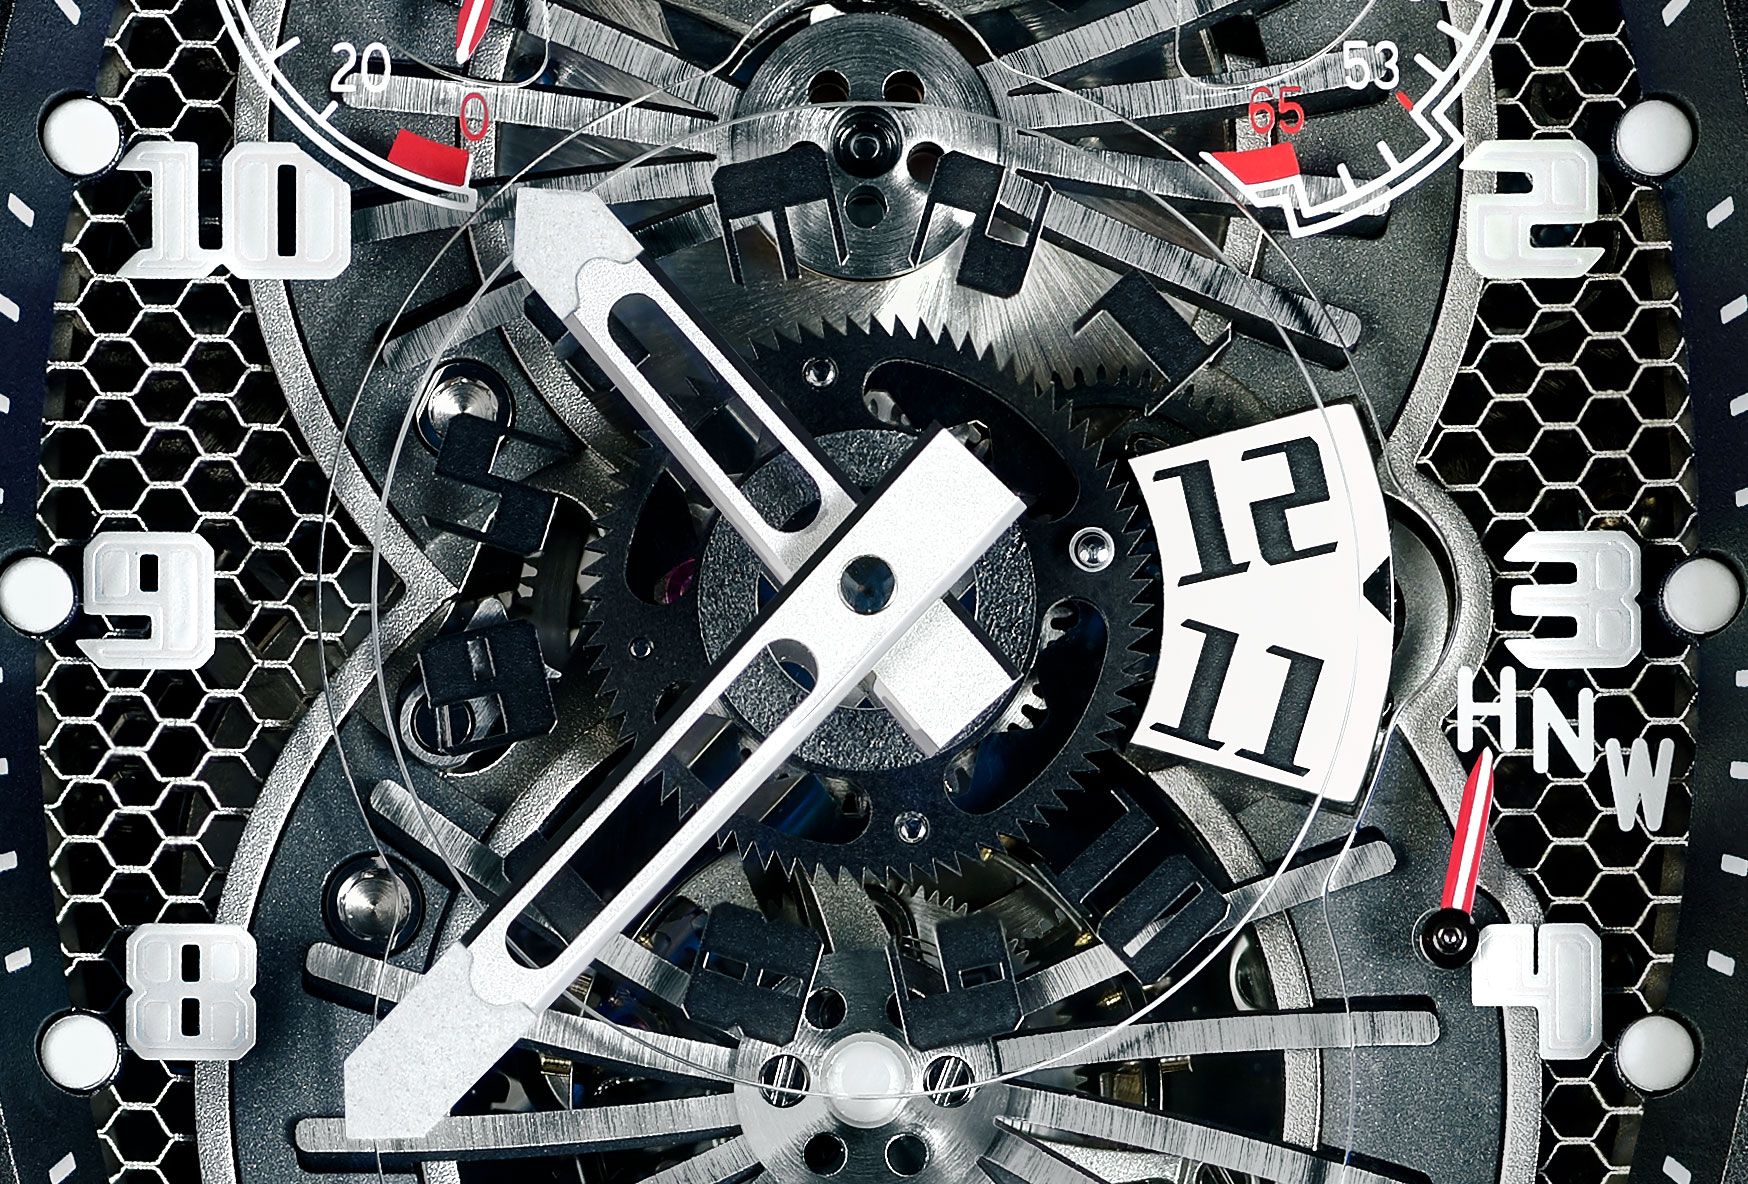 Richard Mille Rm 011-02 Automatic Winding Flyback Chronograph GMT